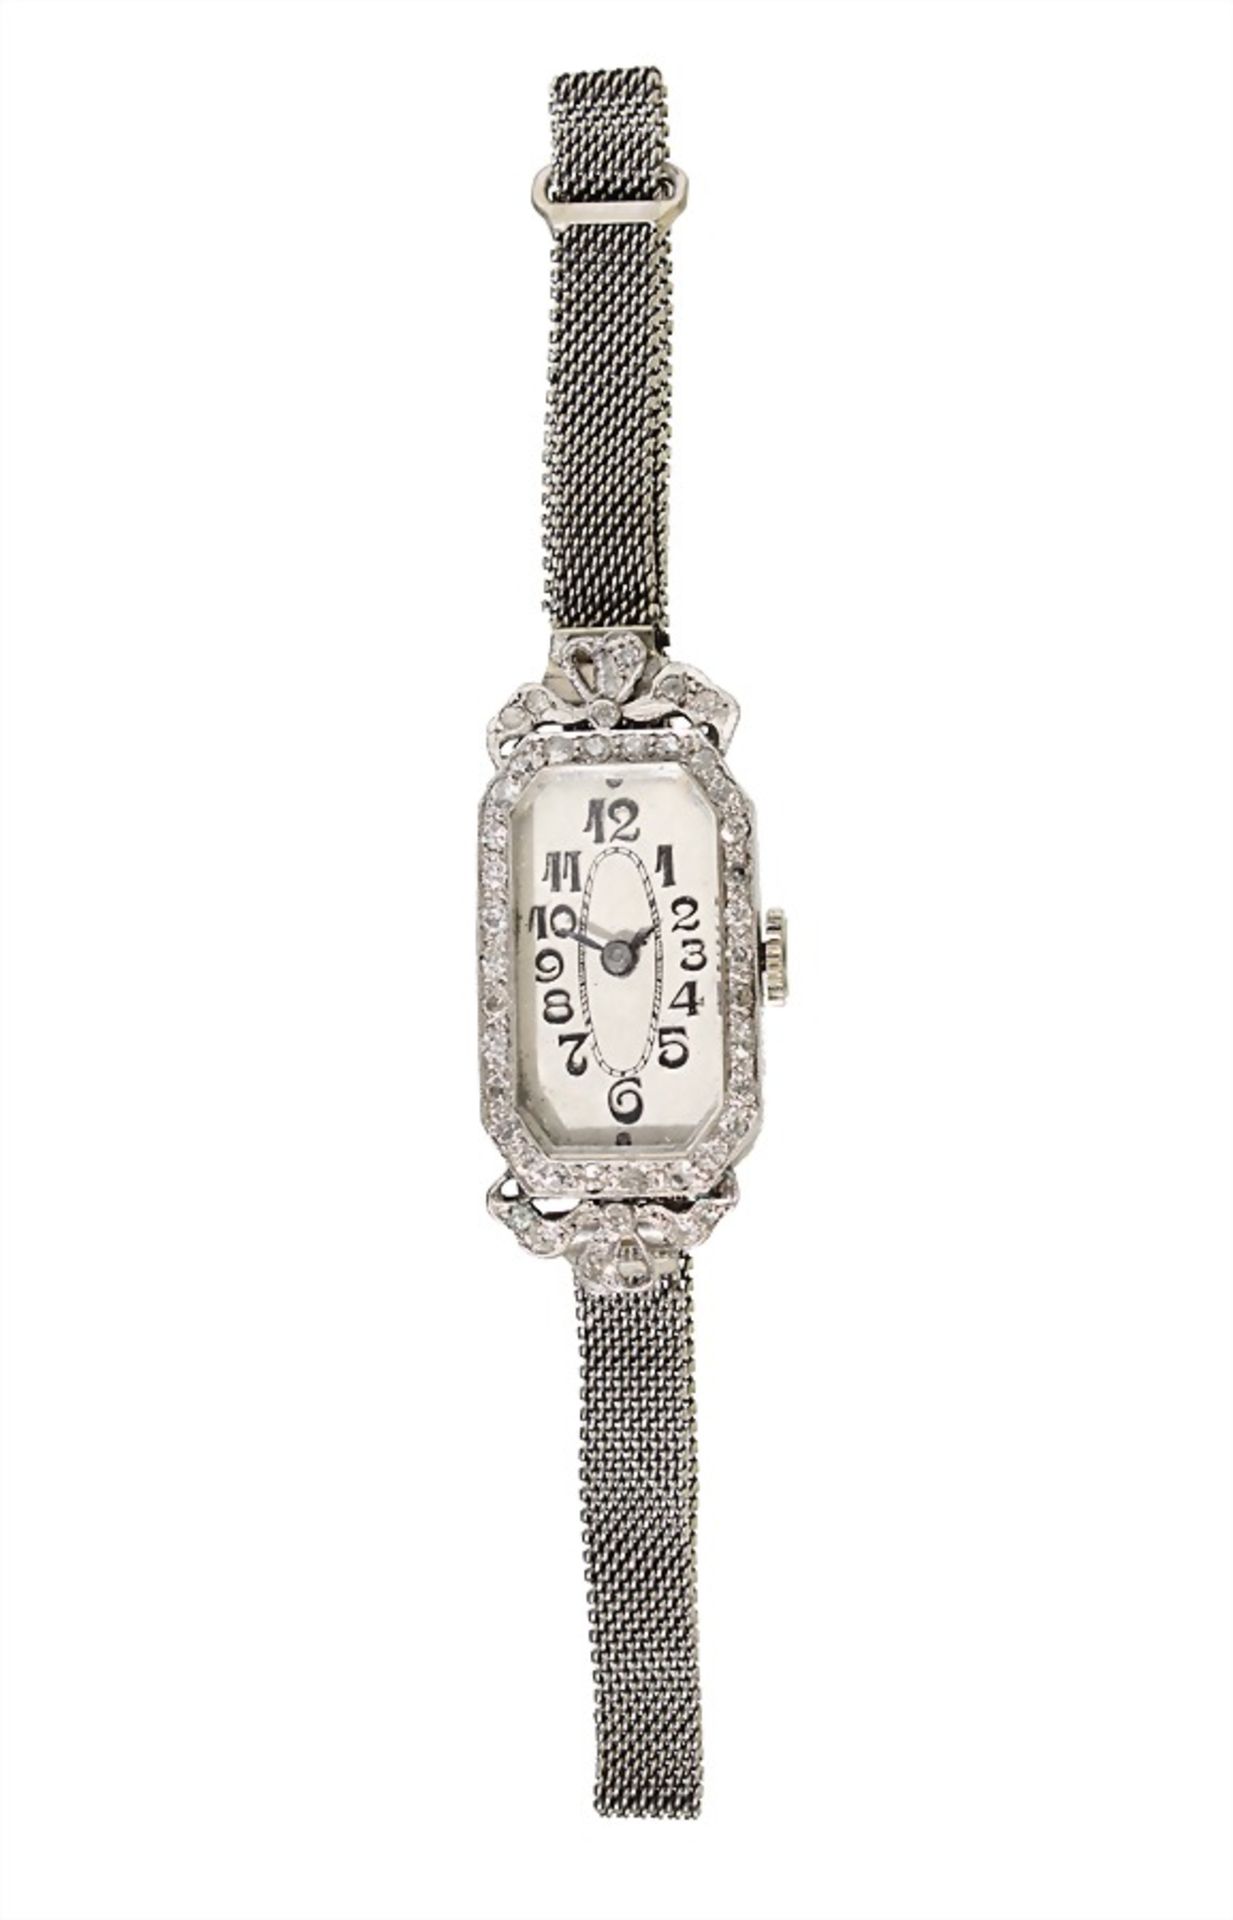 fine ladies watch, ART-DECO from the 1920s, platinum case, cream-colored clockface with Arabic